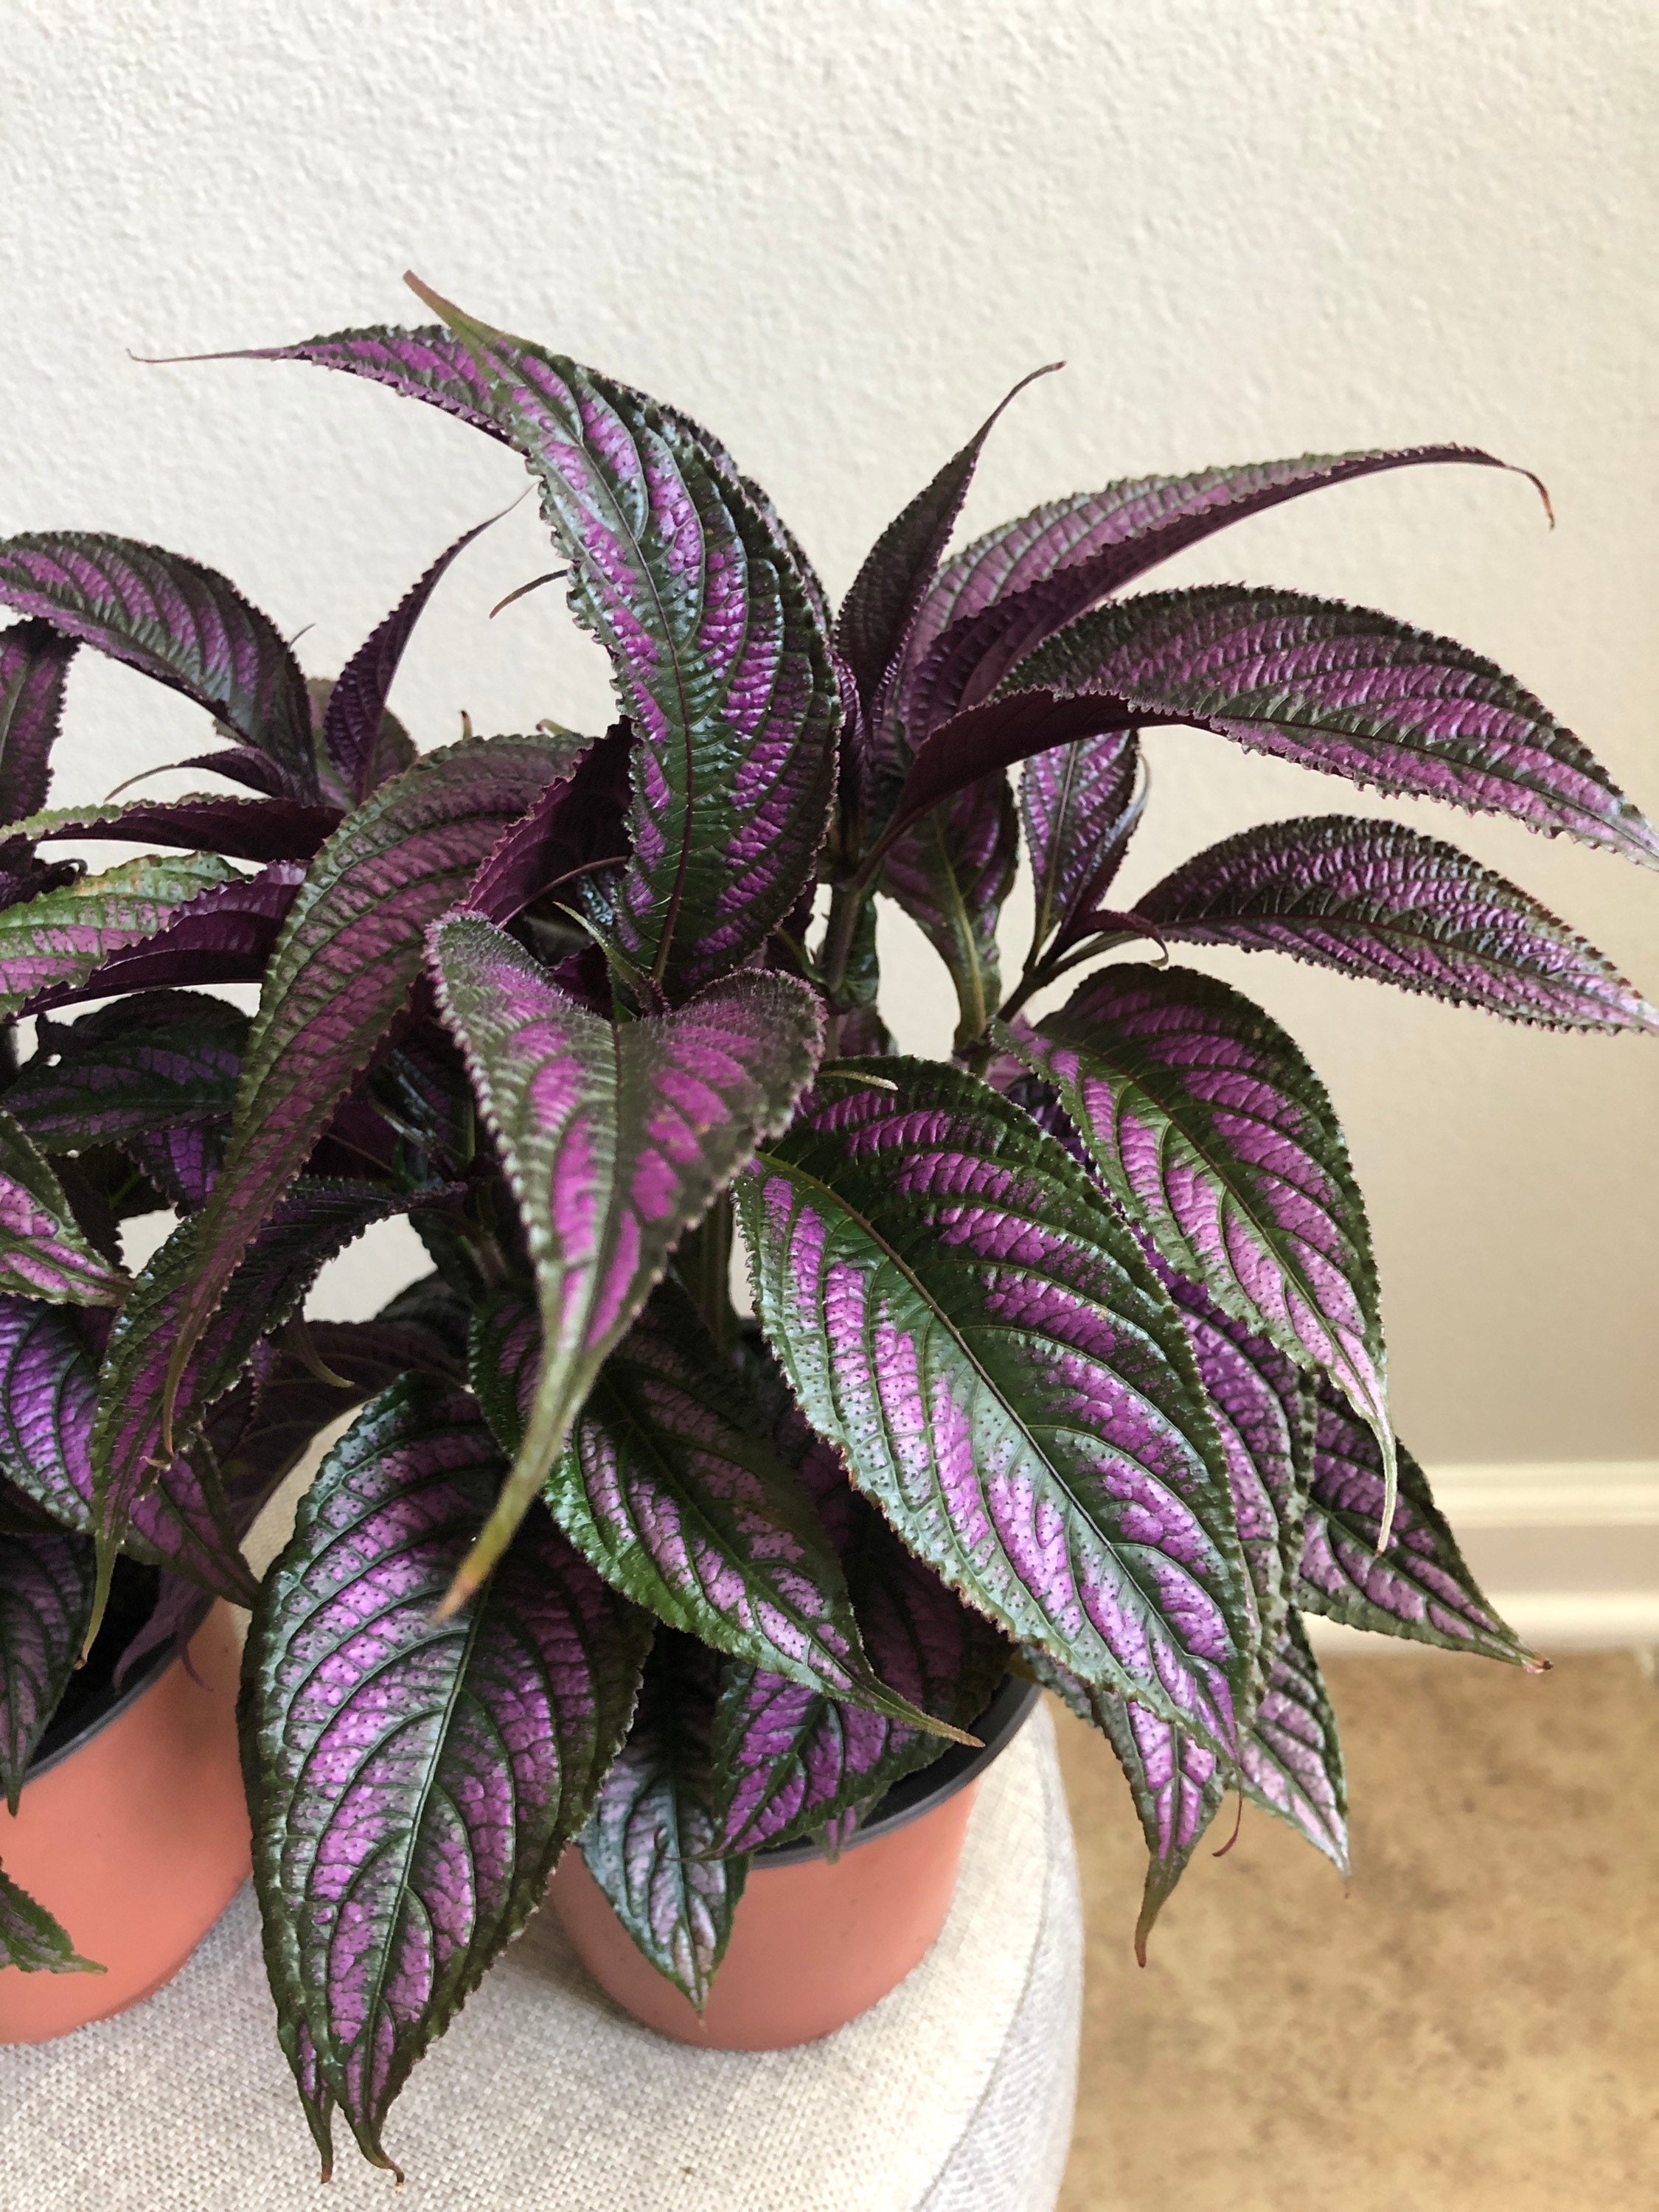 Persian Shield Strobilanthes Live Plants Fully Rooted | Etsy